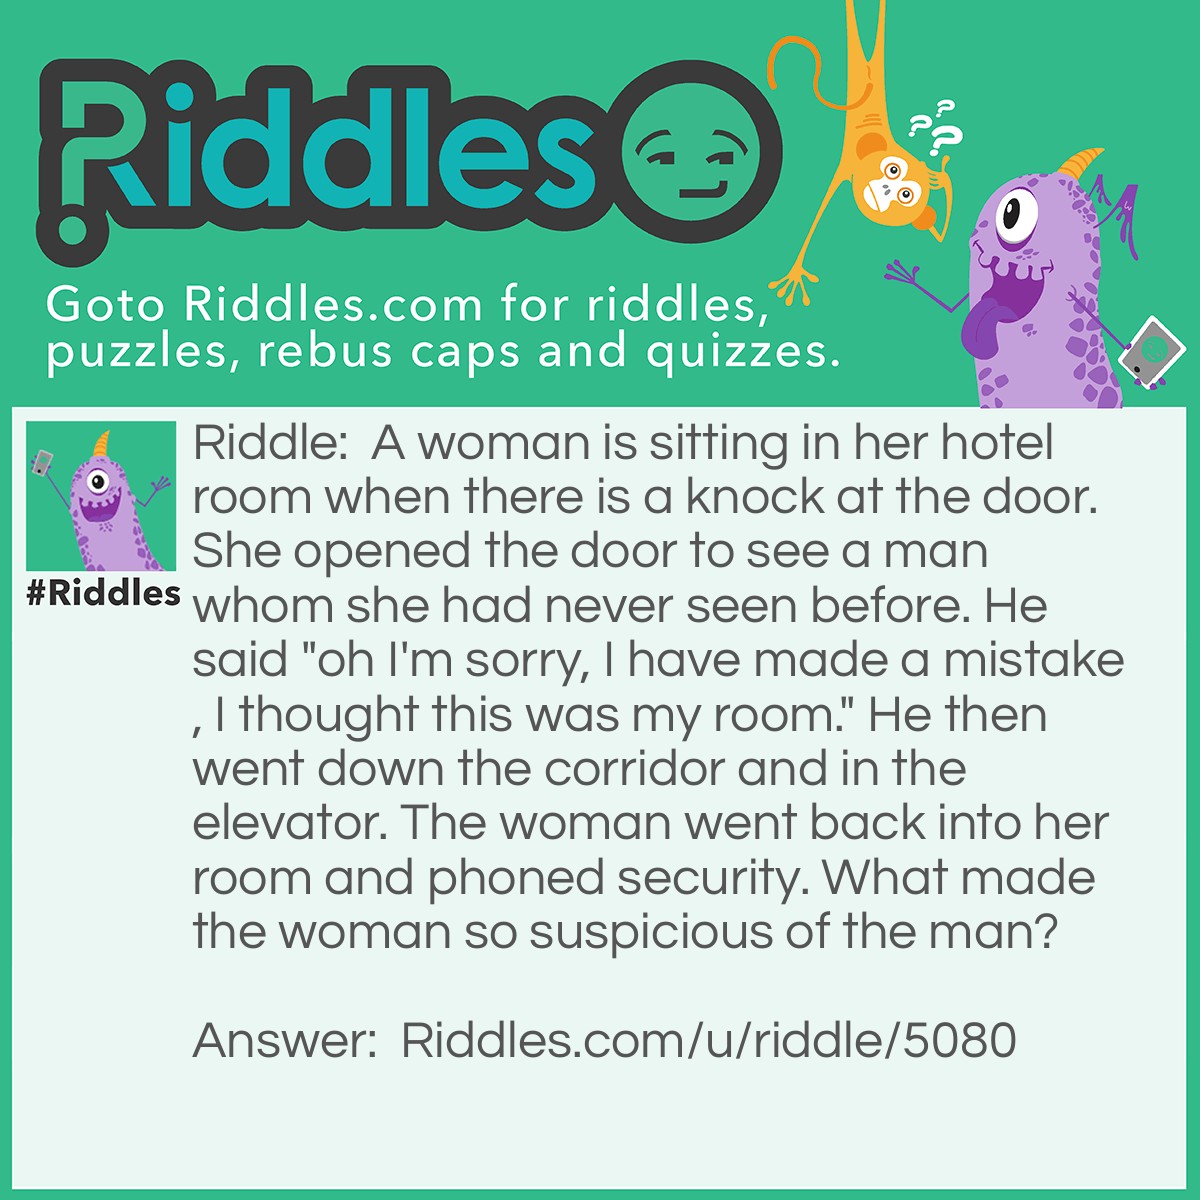 Riddle: A woman is sitting in her hotel room when there is a knock at the door. She opened the door to see a man whom she had never seen before. He said "oh I'm sorry, I have made a mistake, I thought this was my room." He then went down the corridor and in the elevator. The woman went back into her room and phoned security. What made the woman so suspicious of the man? Answer: You don't knock on your own hotel door and the man did.